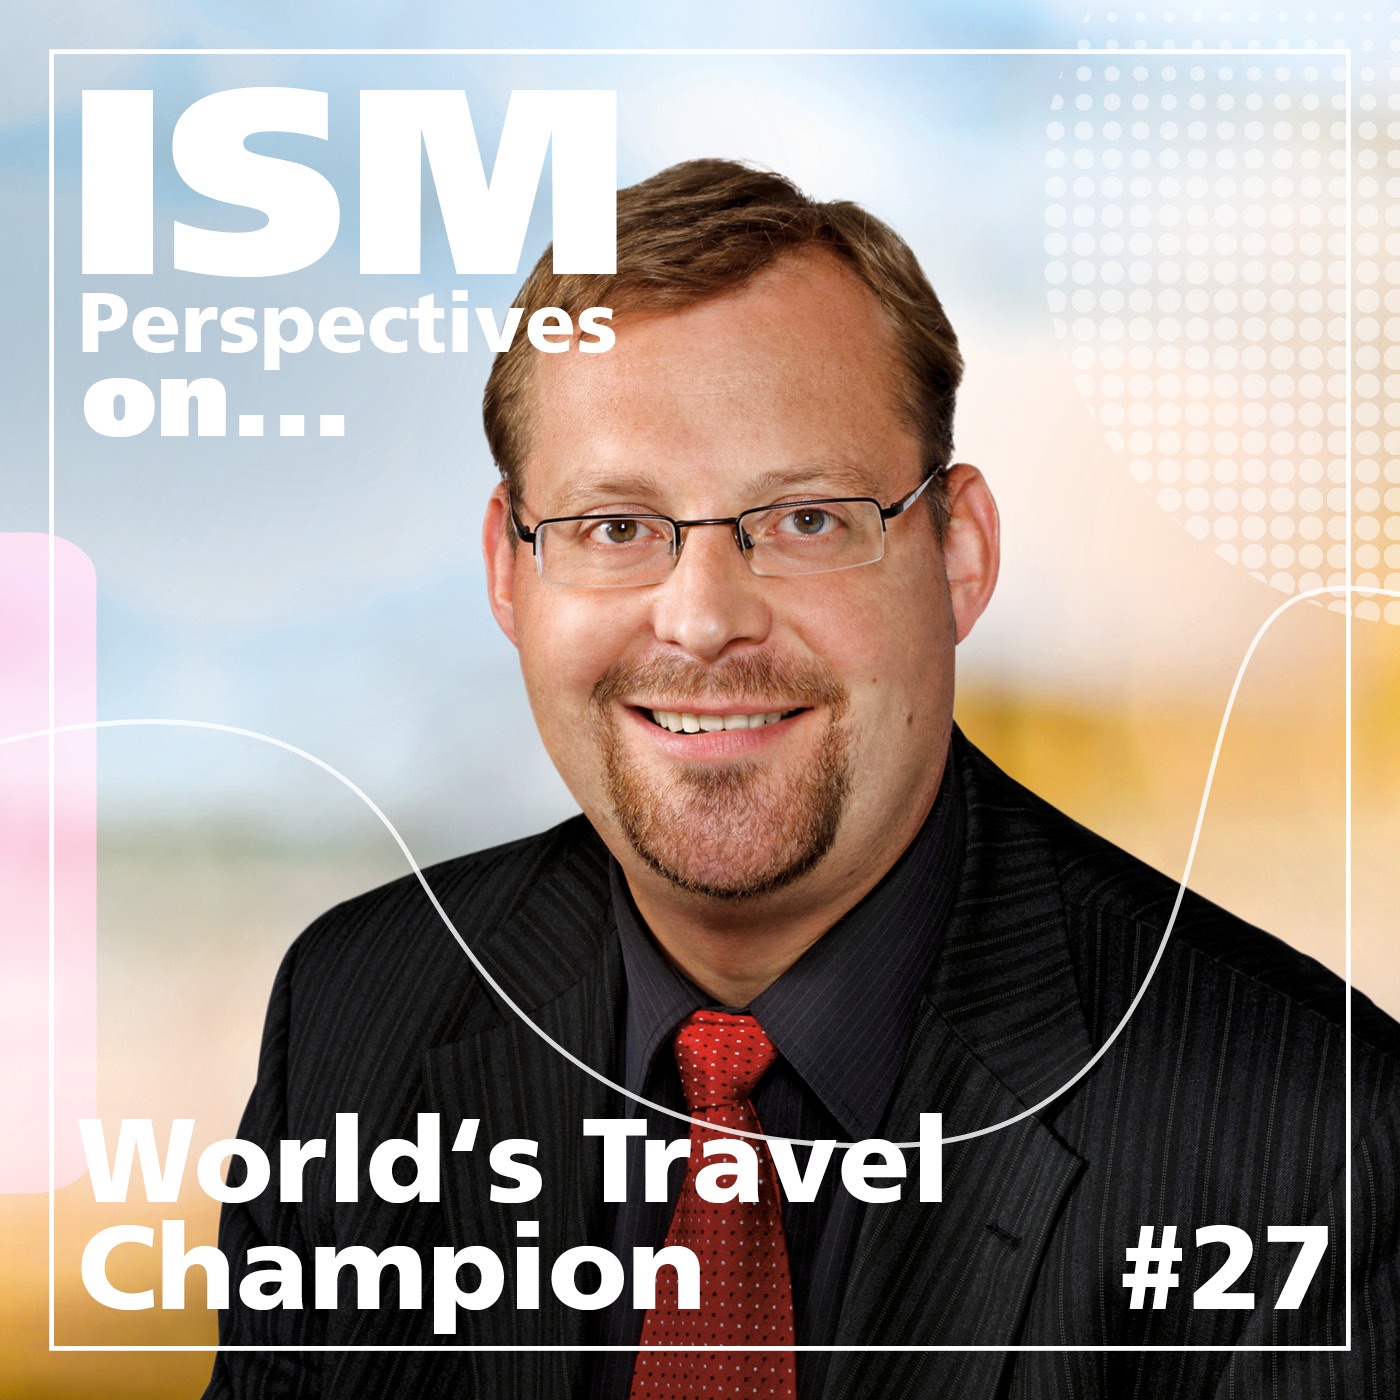 Perspectives on: World's Travel Champion